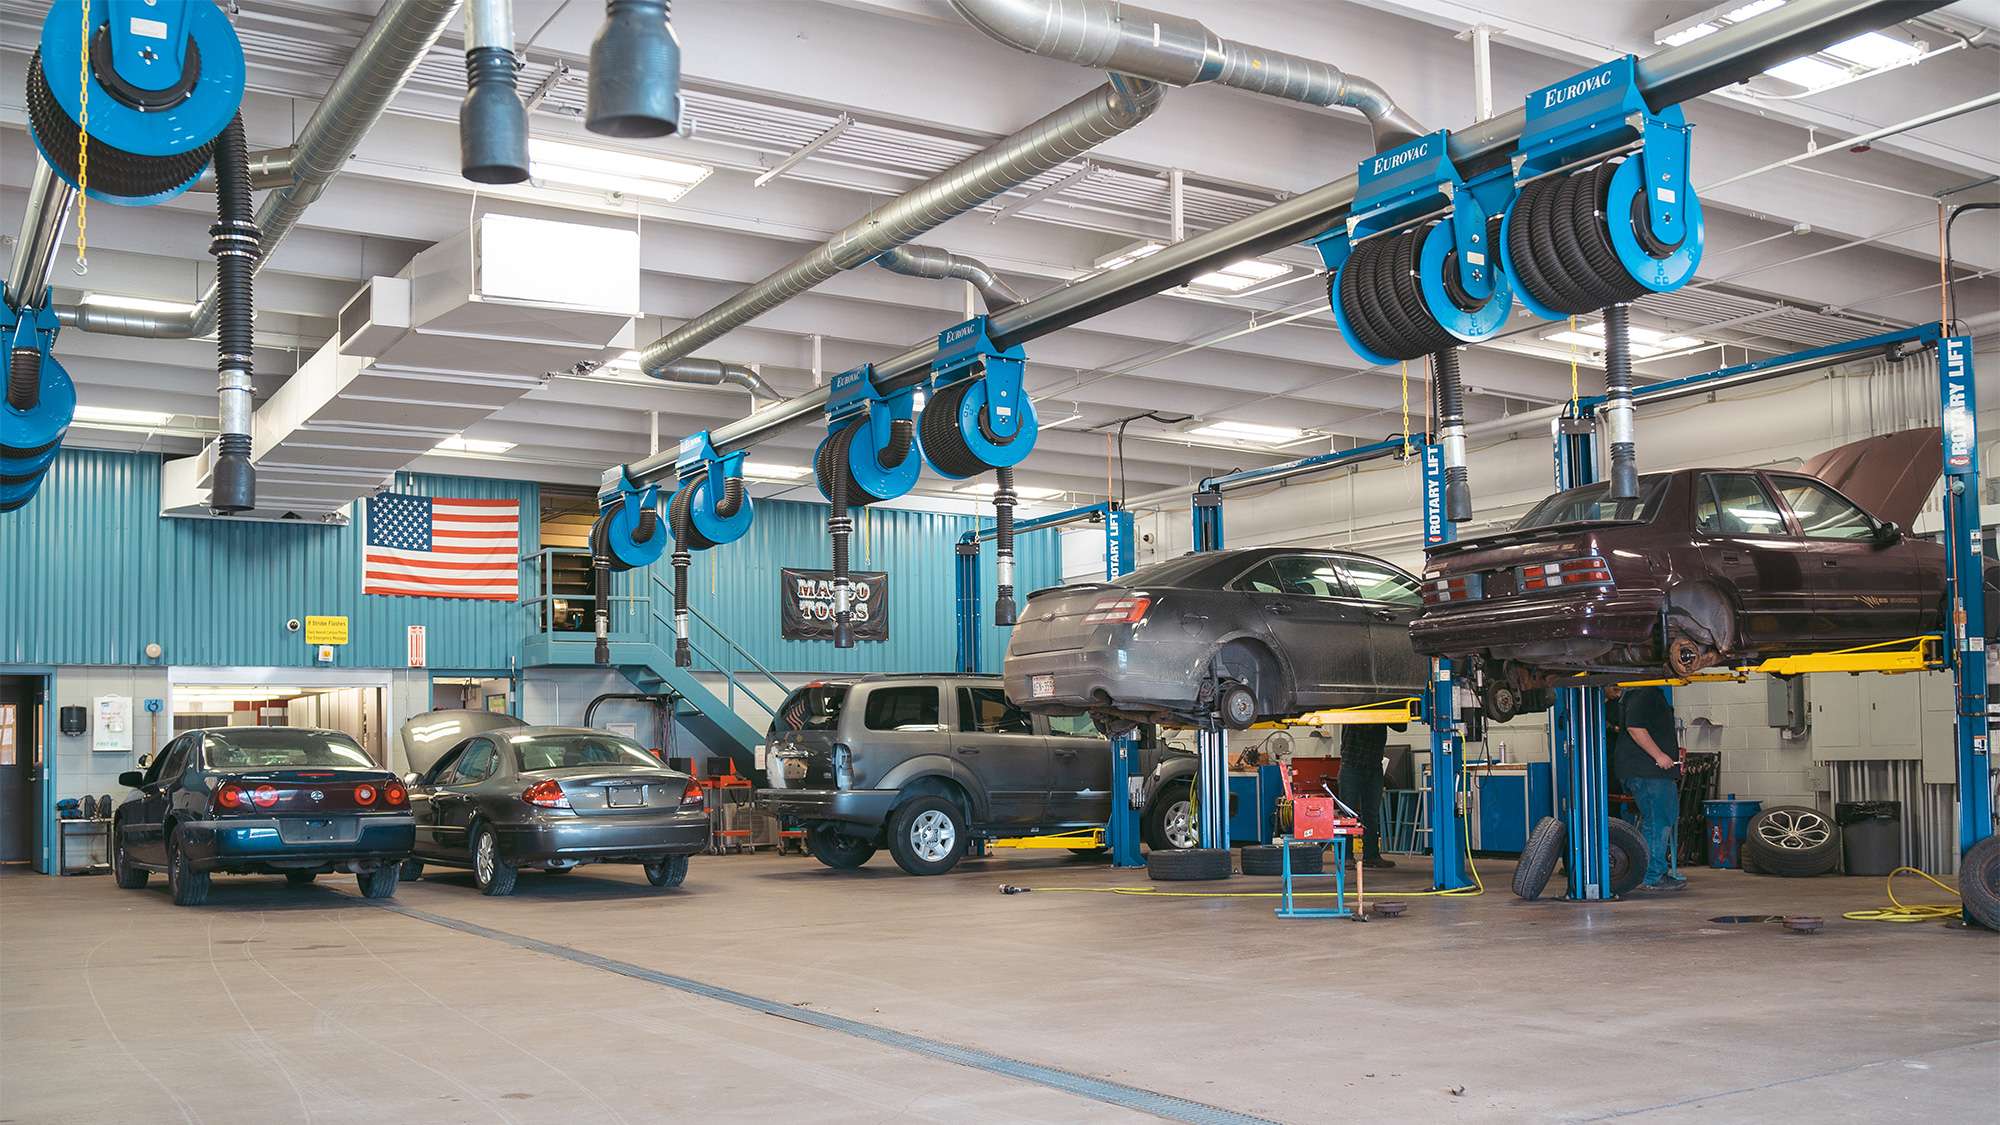 Wide interior view of NTC's automotive repair shop with several vehicles being worked on by student automotive technicians.